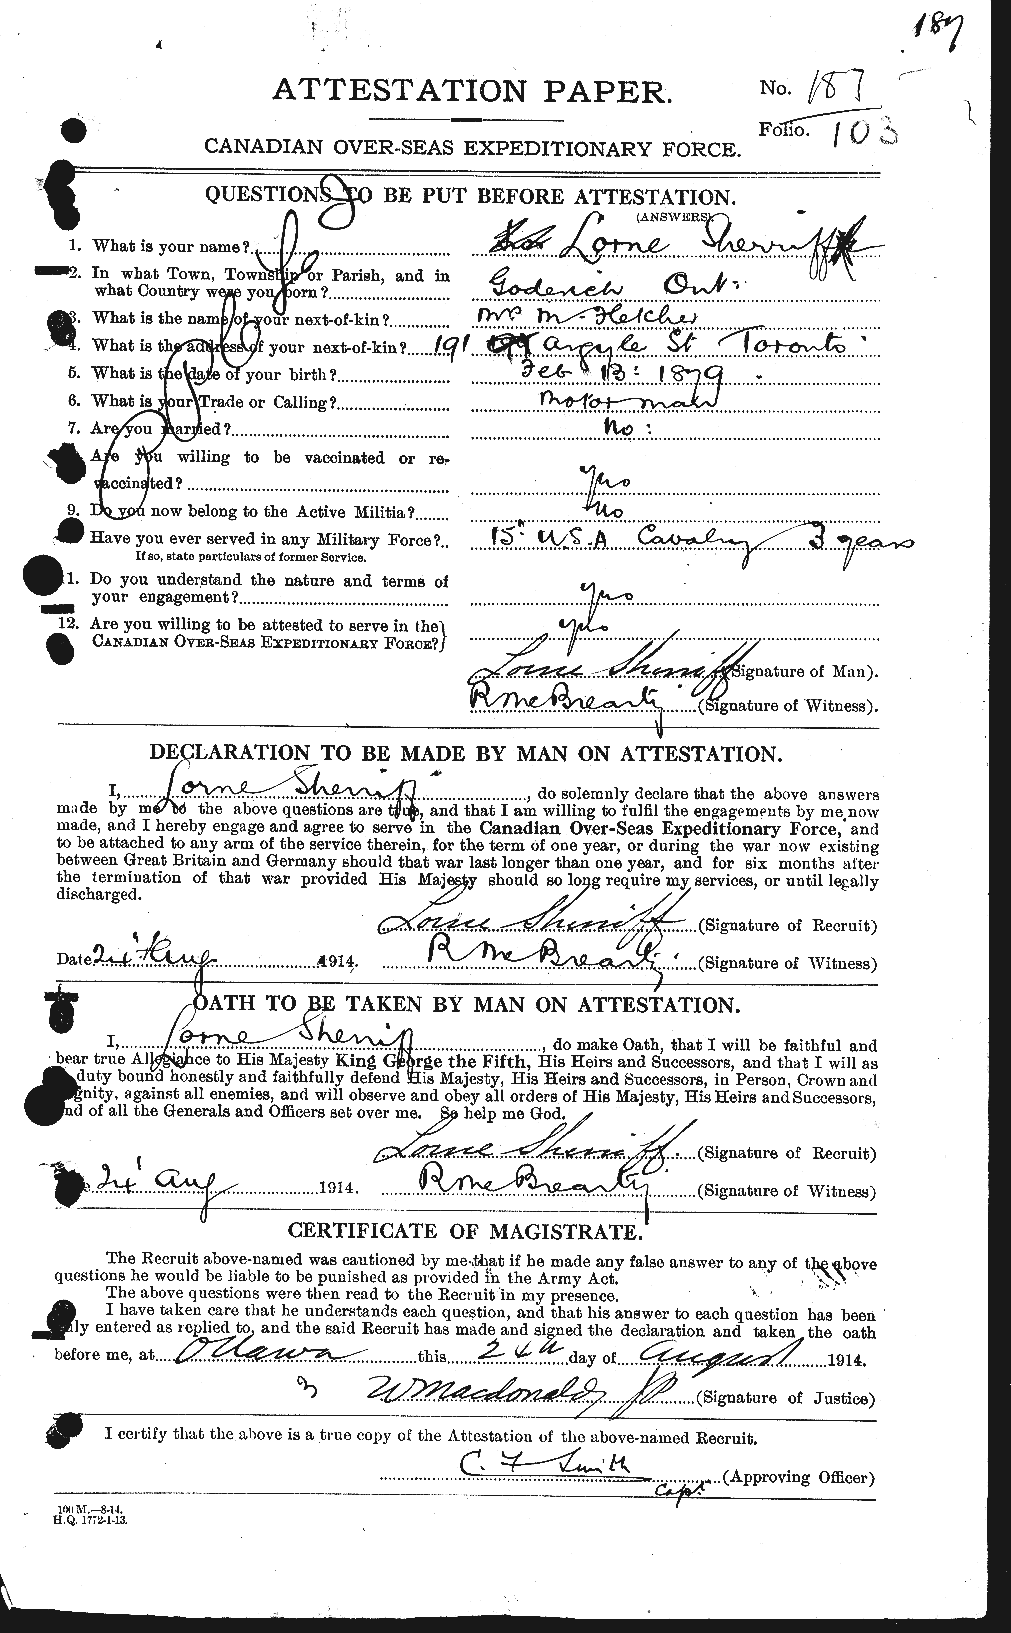 Personnel Records of the First World War - CEF 092391a